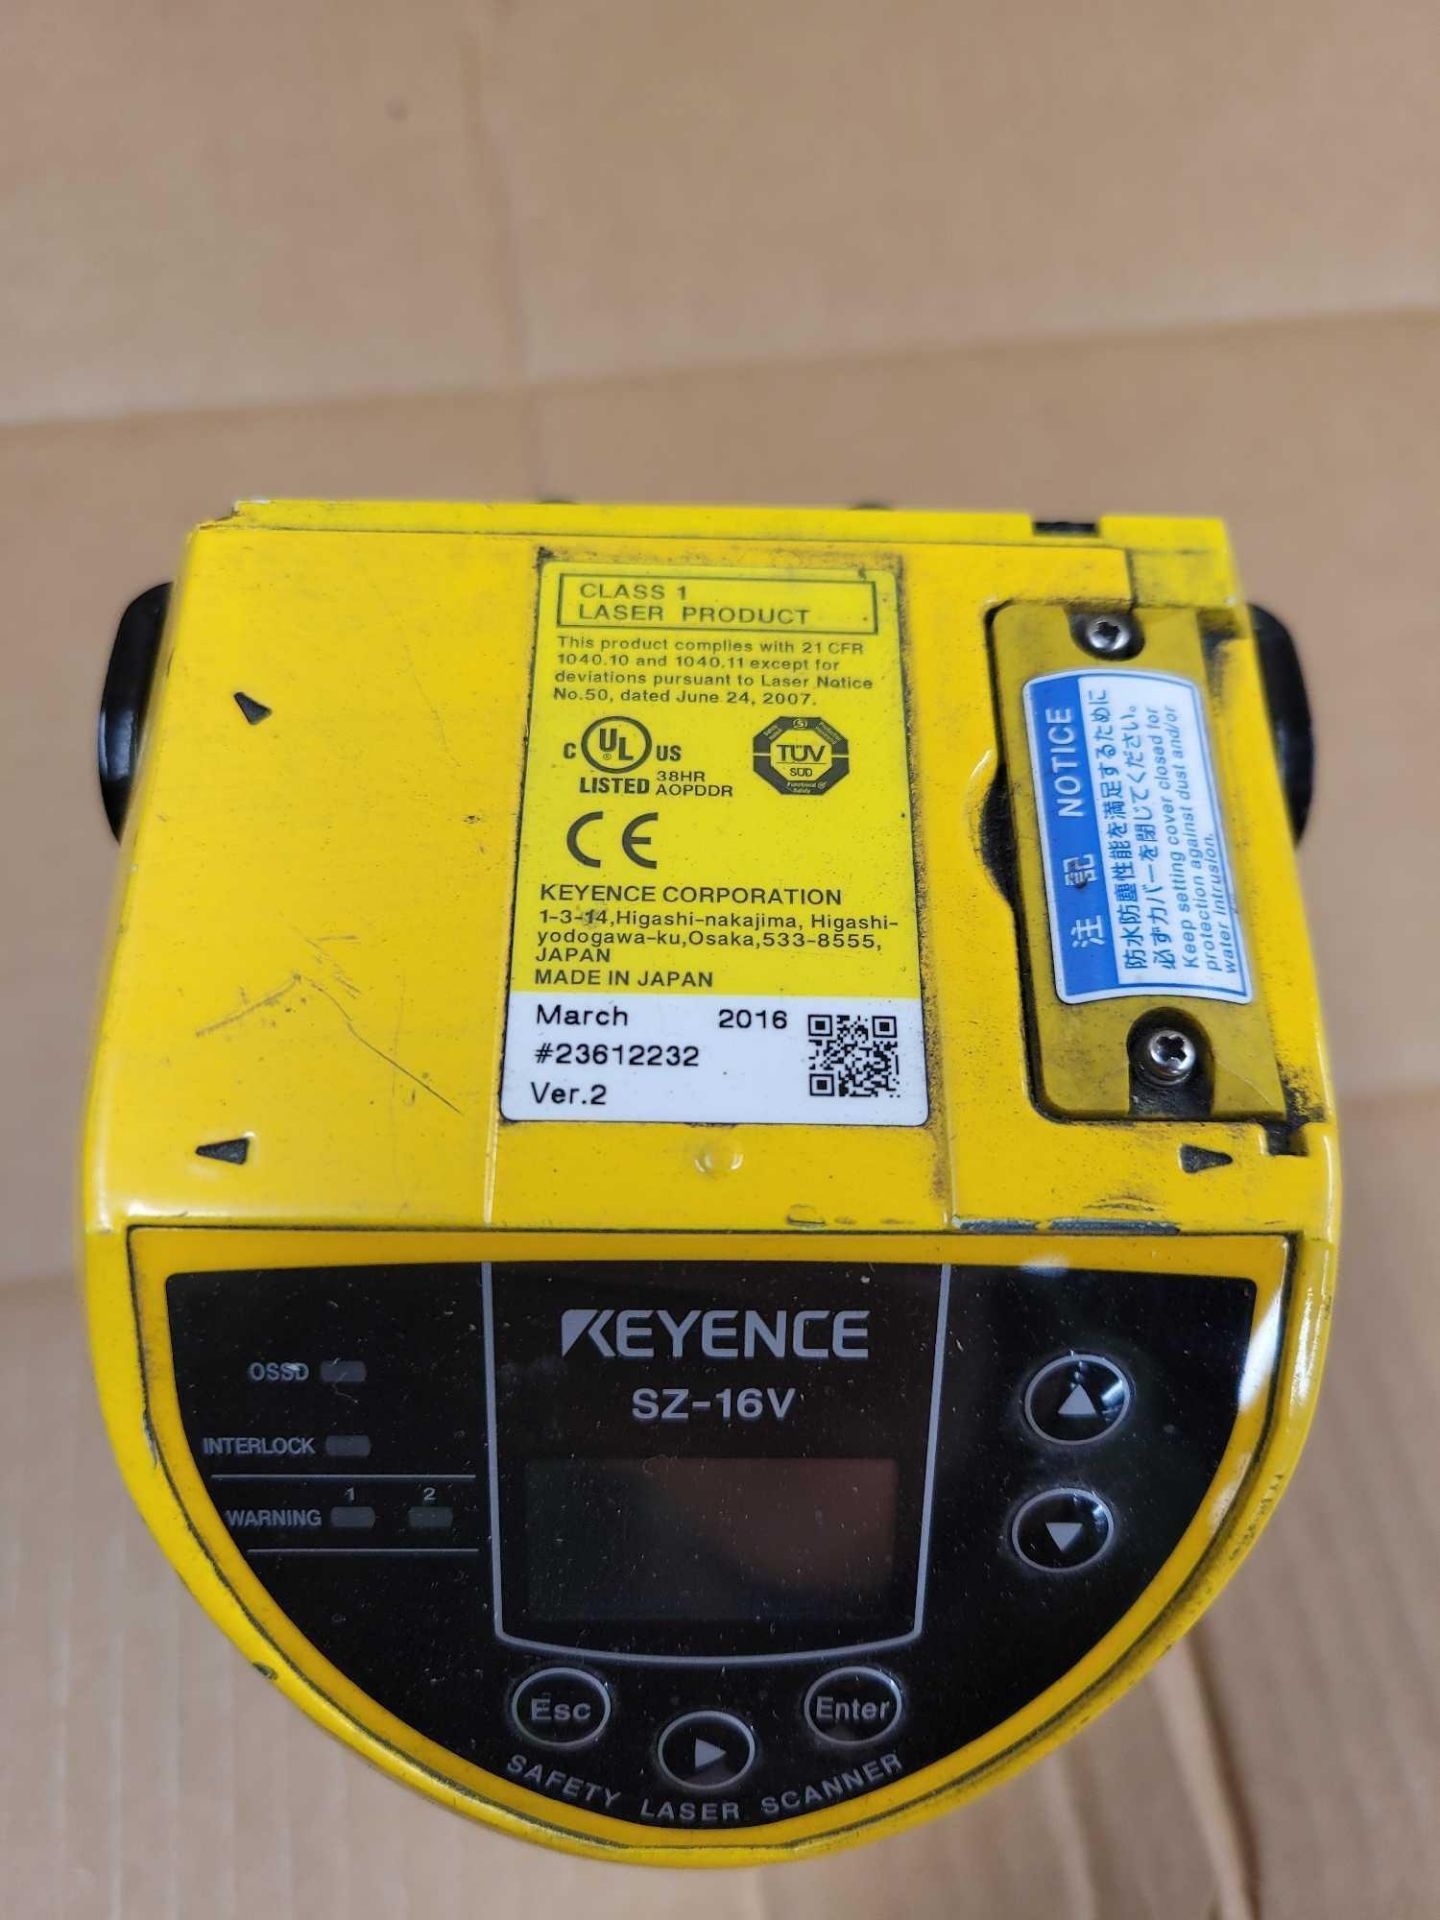 KEYENCE SZ-16V / Safety Laser Scanner  /  Lot Weight: 4.2 lbs - Image 3 of 8